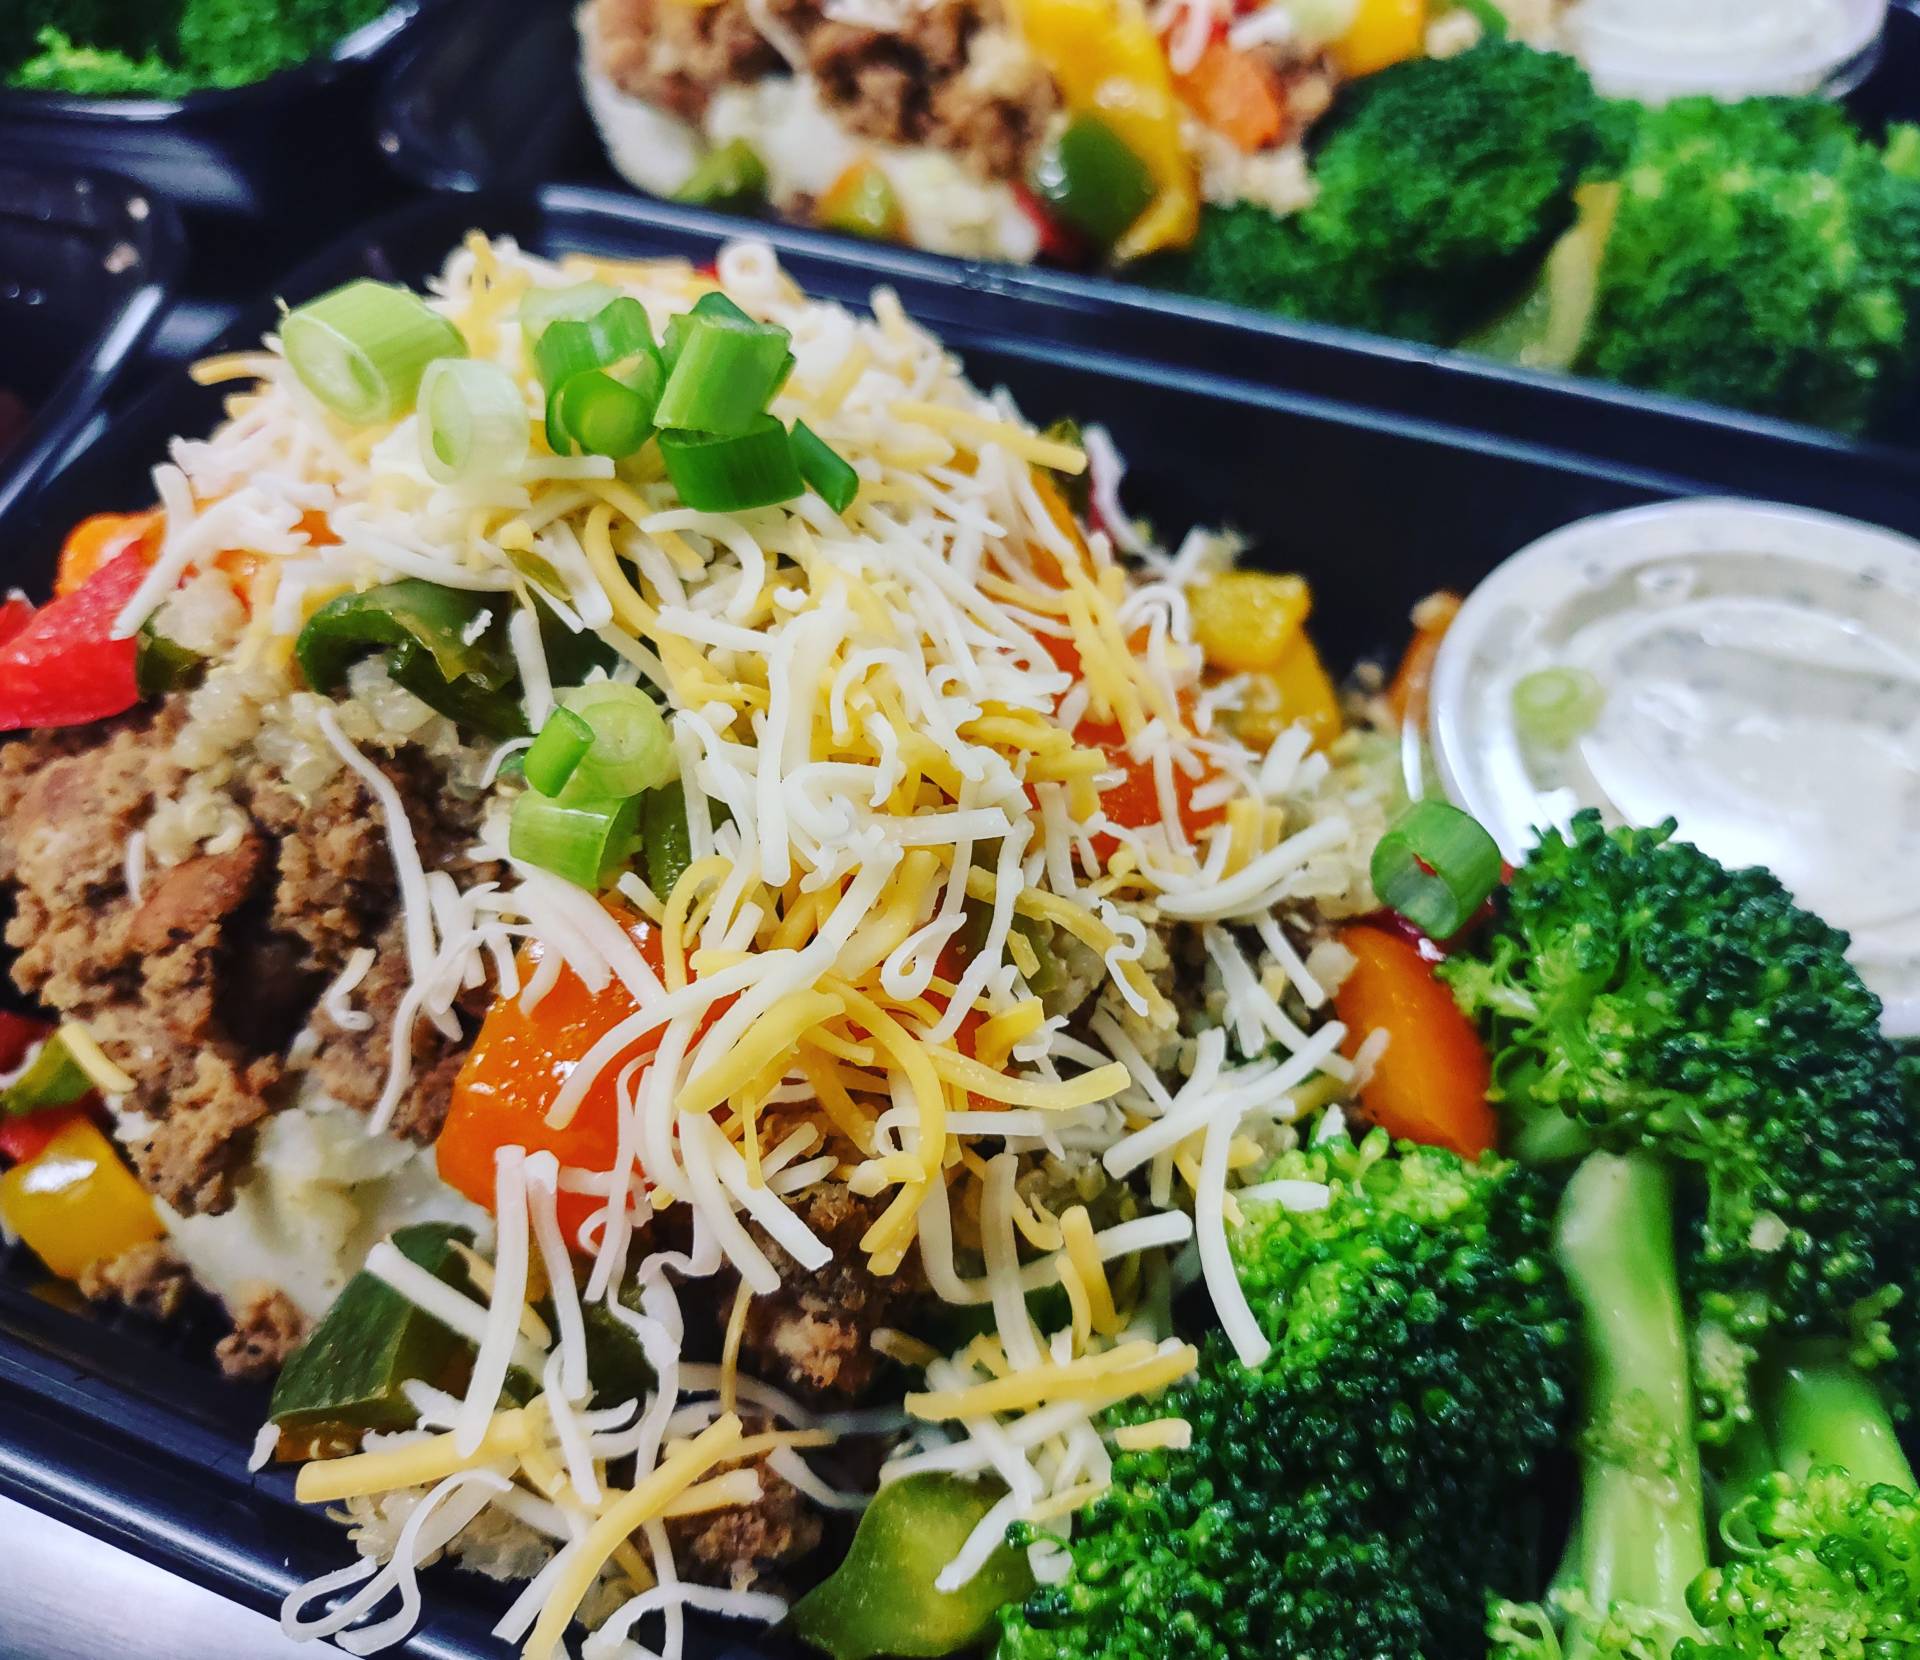 KETO-Loaded Broccoli w/ Seasoned Grass-fed Beef, Roasted Peppers, Blended Cheddar, Pumpkin Seeds & Green Onions...Ranch Sauce.